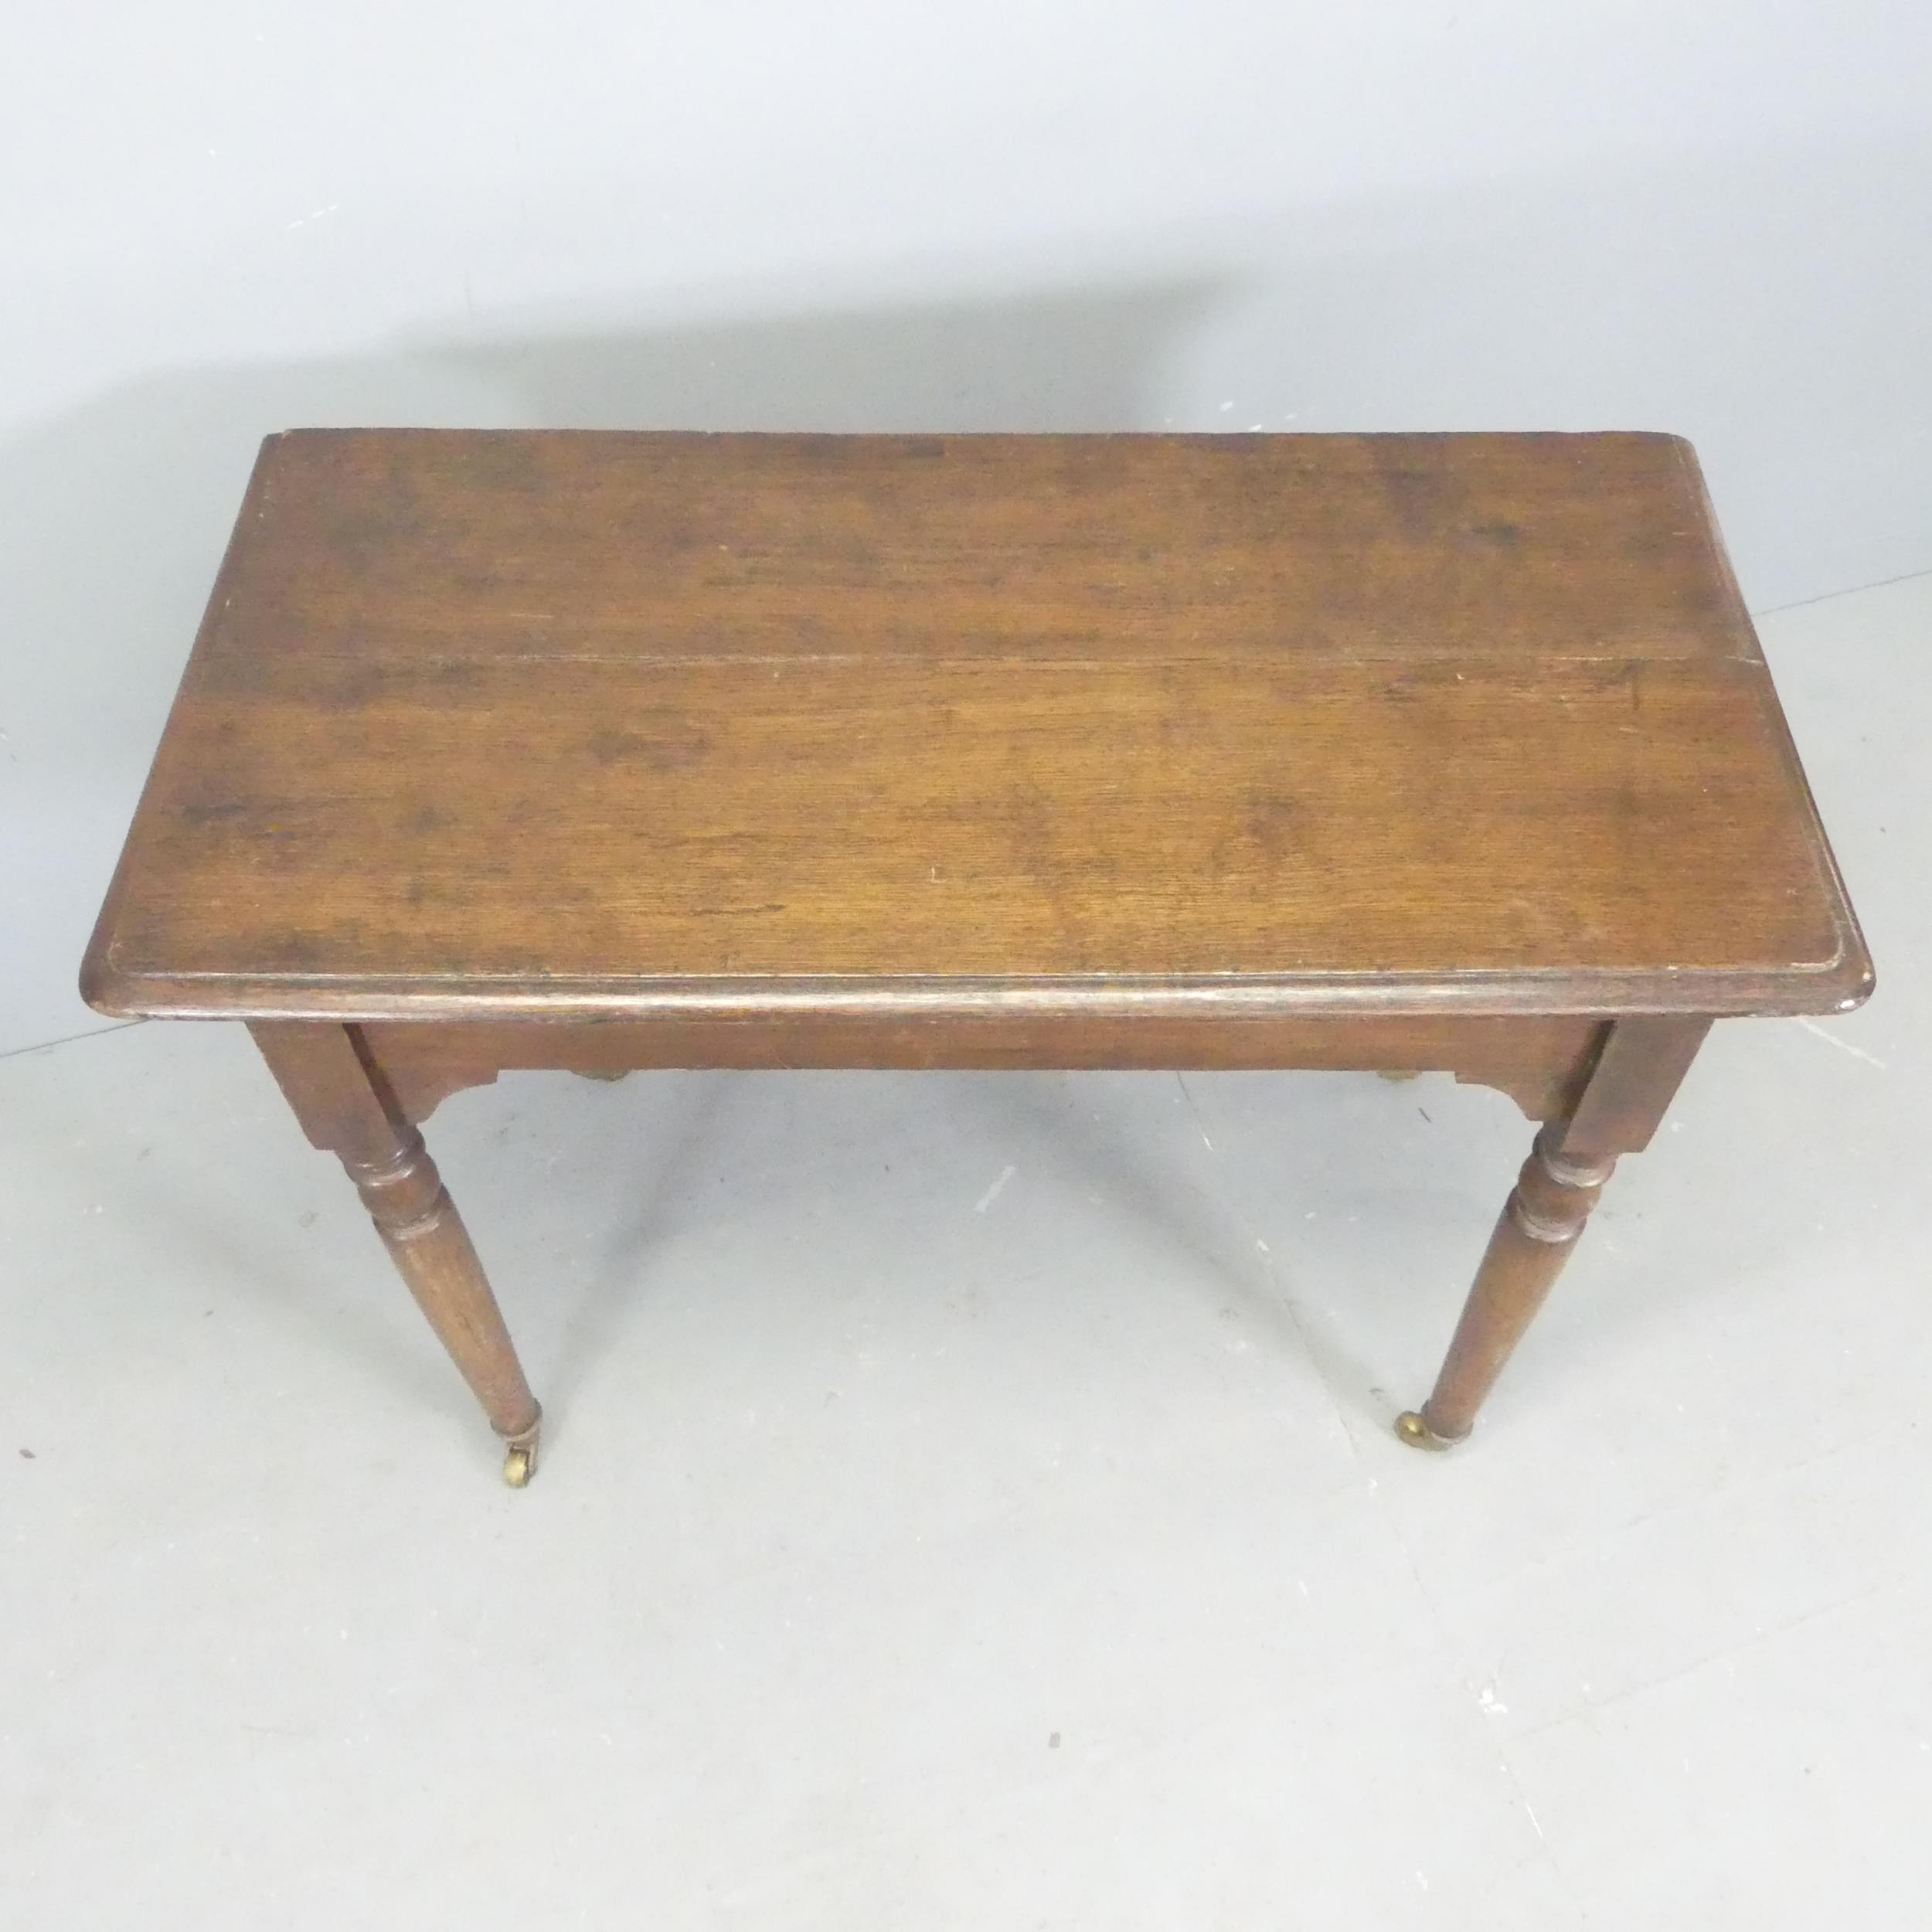 A Victorian oak hall table, with turned legs and brass casters. 100x77x48cm. - Image 2 of 2